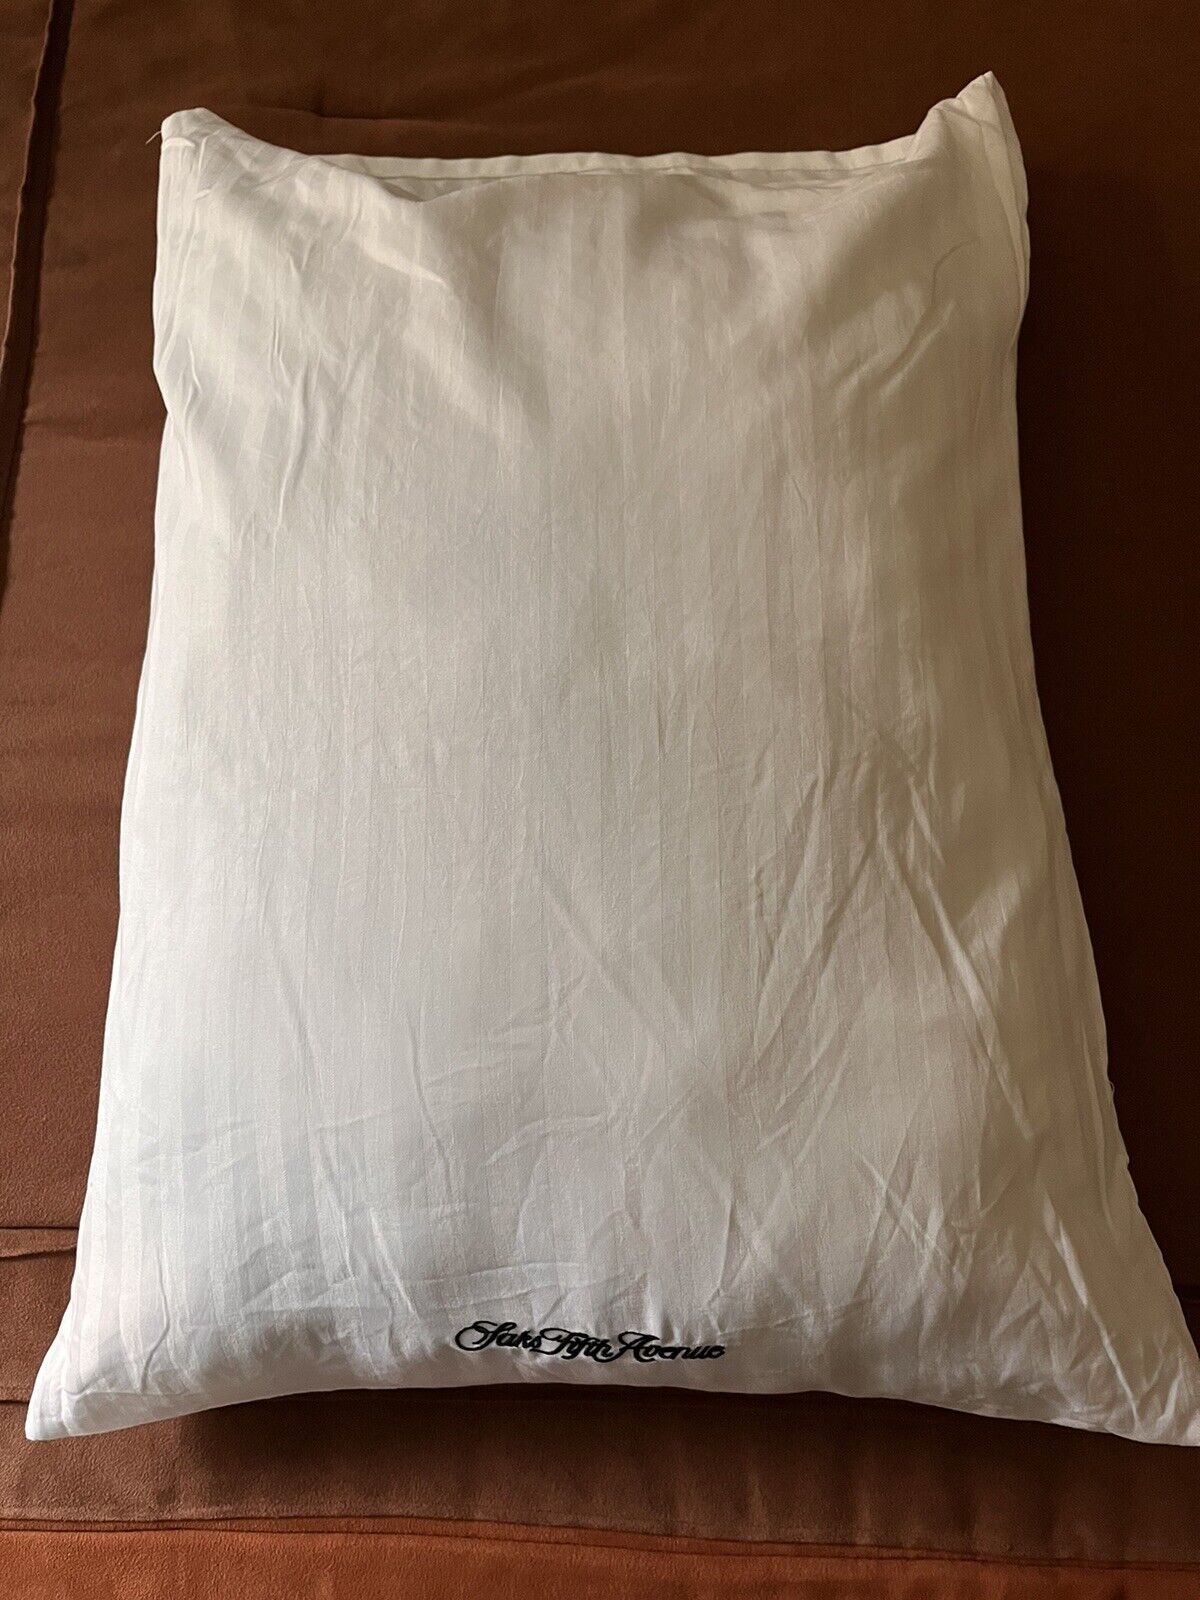 UNITED AIRLINES Polaris SAKS FIFTH AVENUE Business First White Pillow Pillowcase